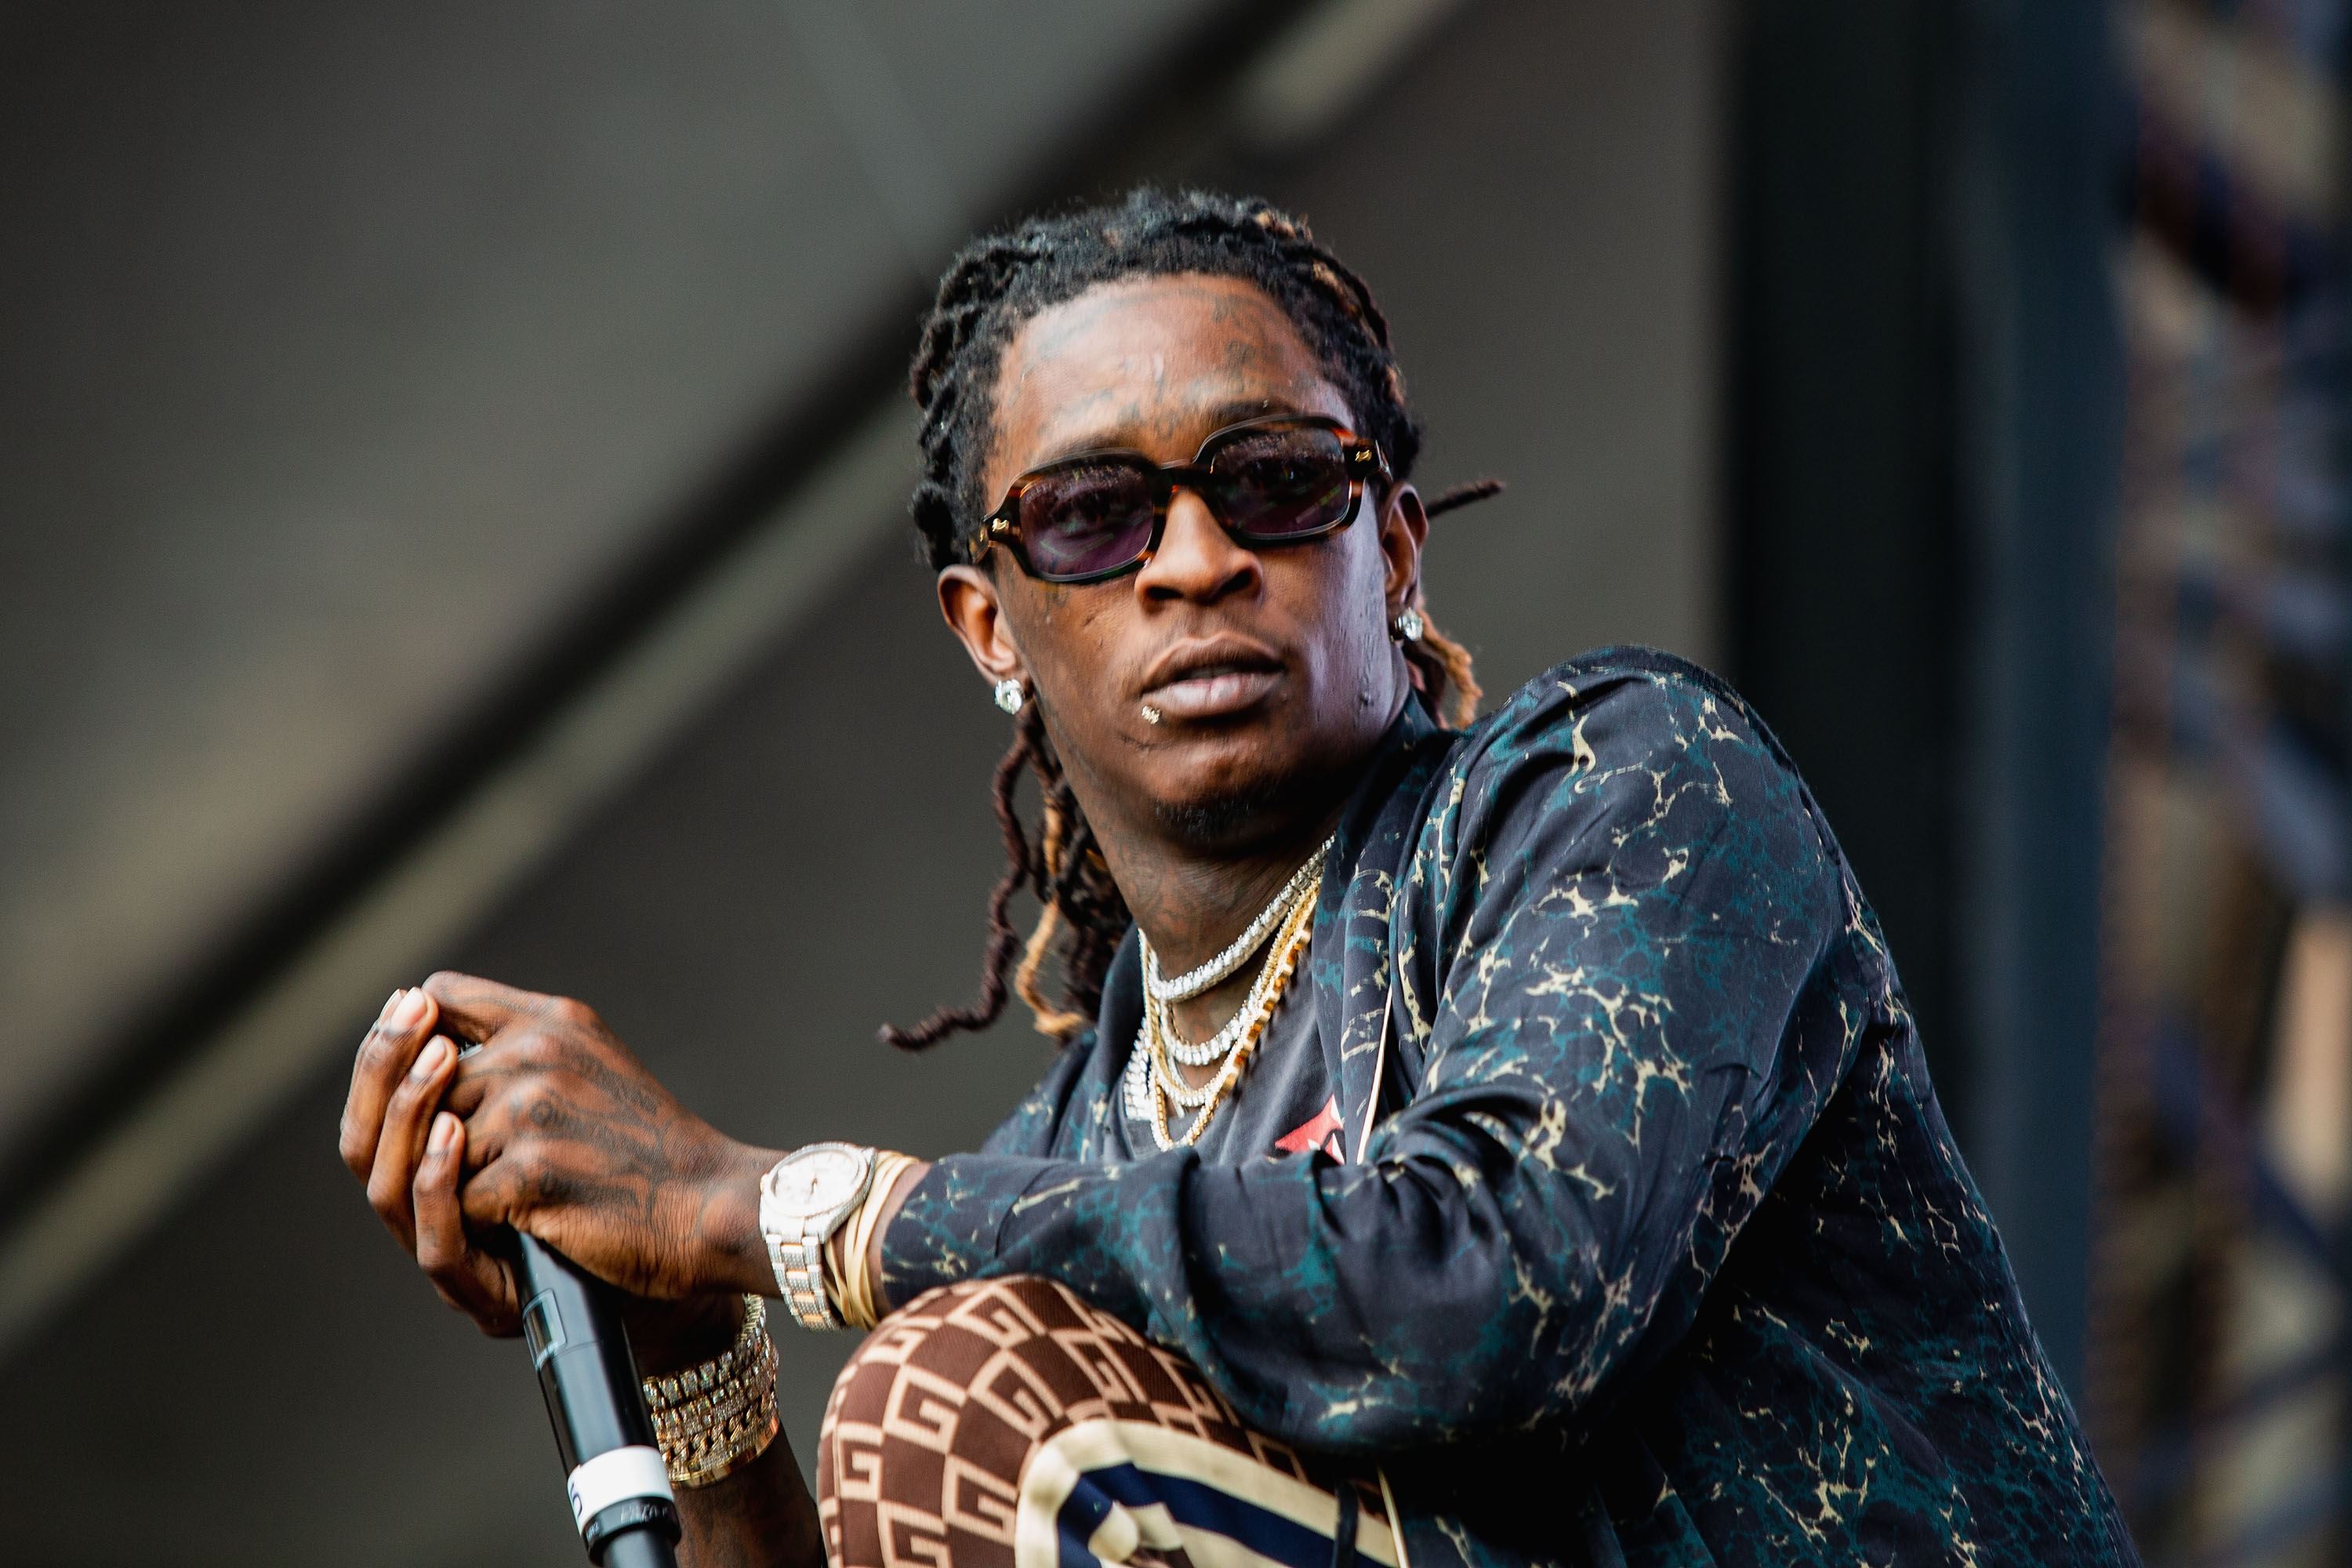 What is the Story Behind Young Thug's Dress?